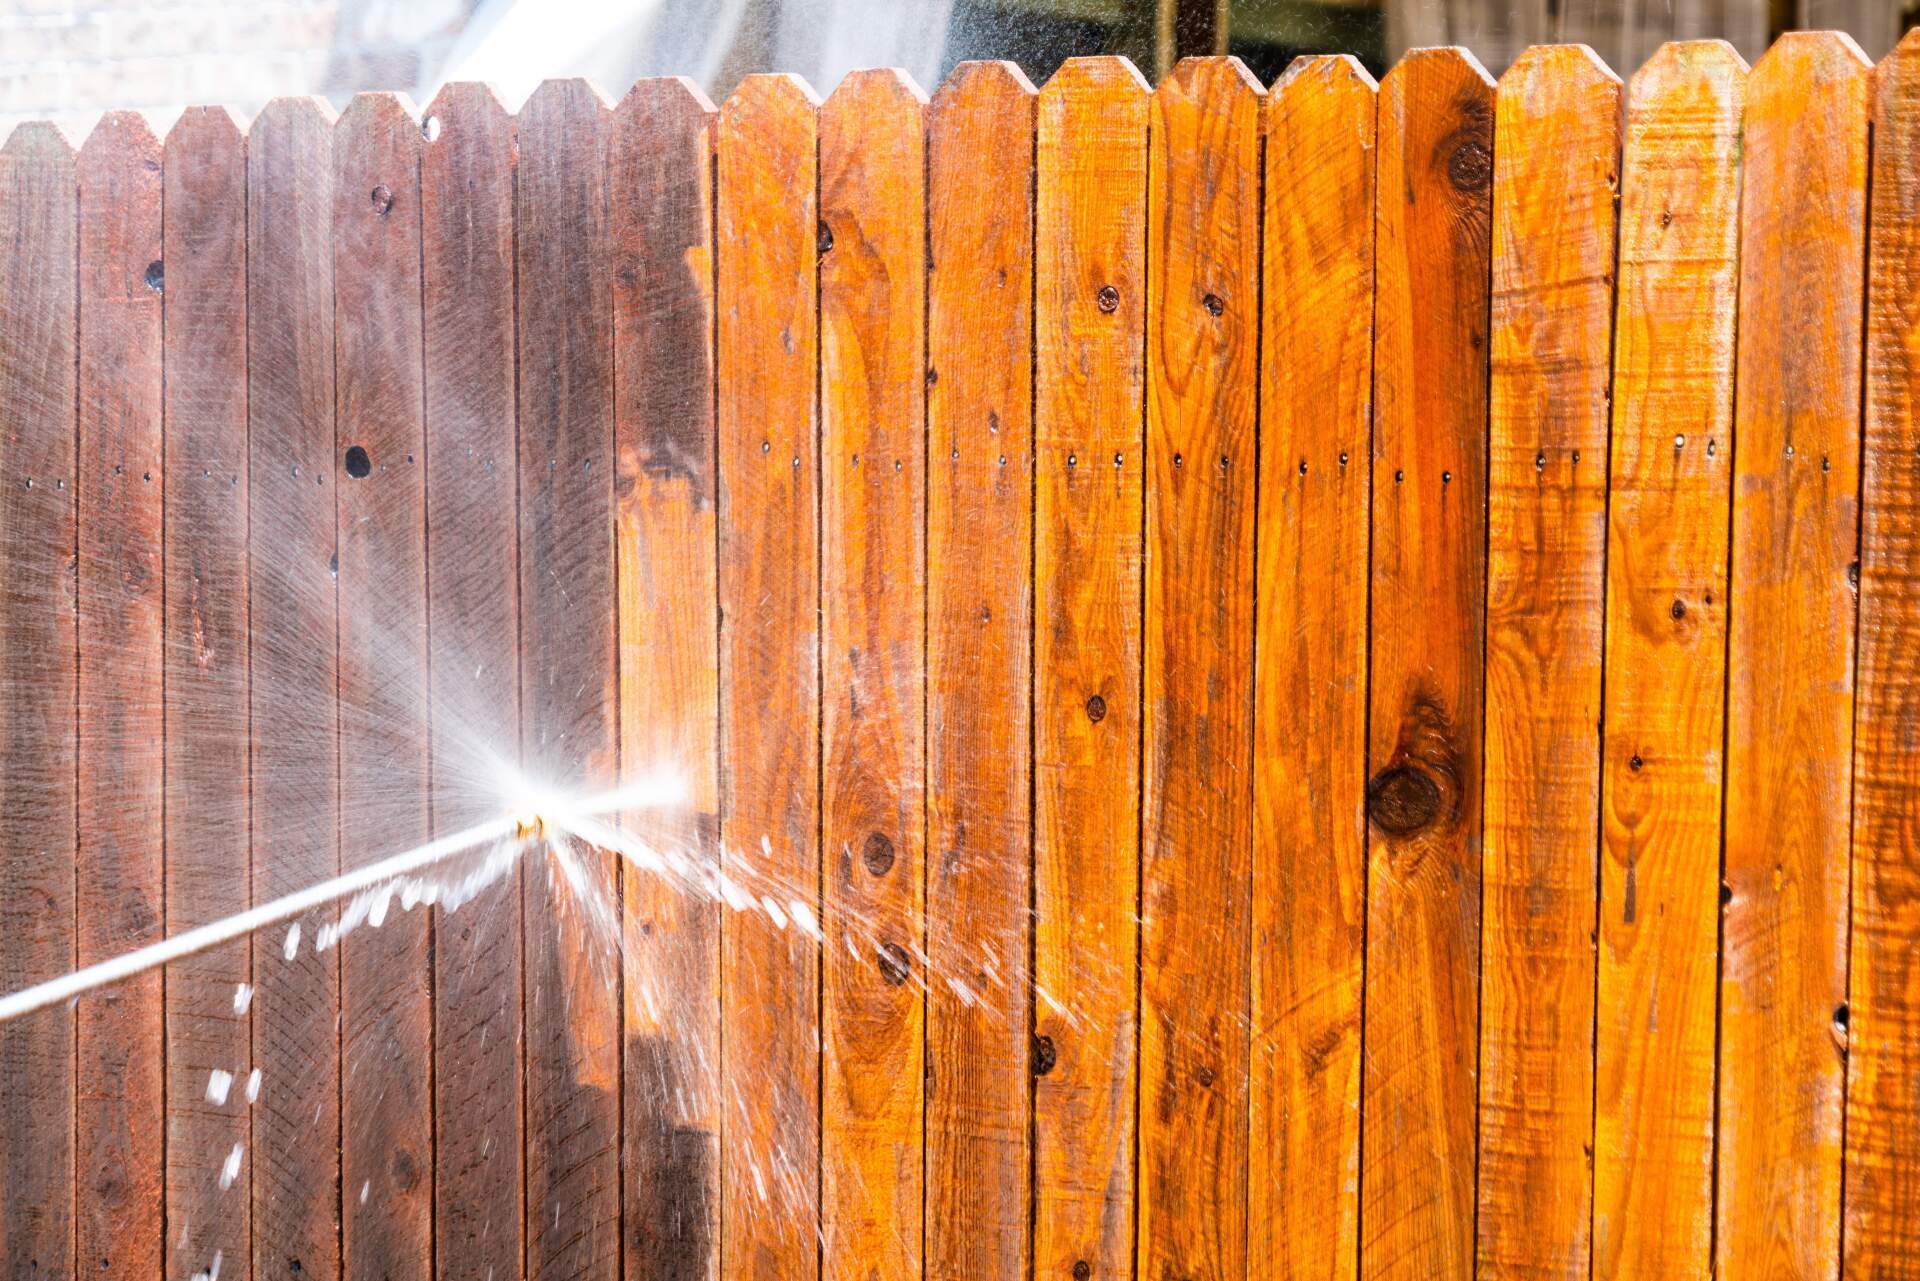 Power washing the fence